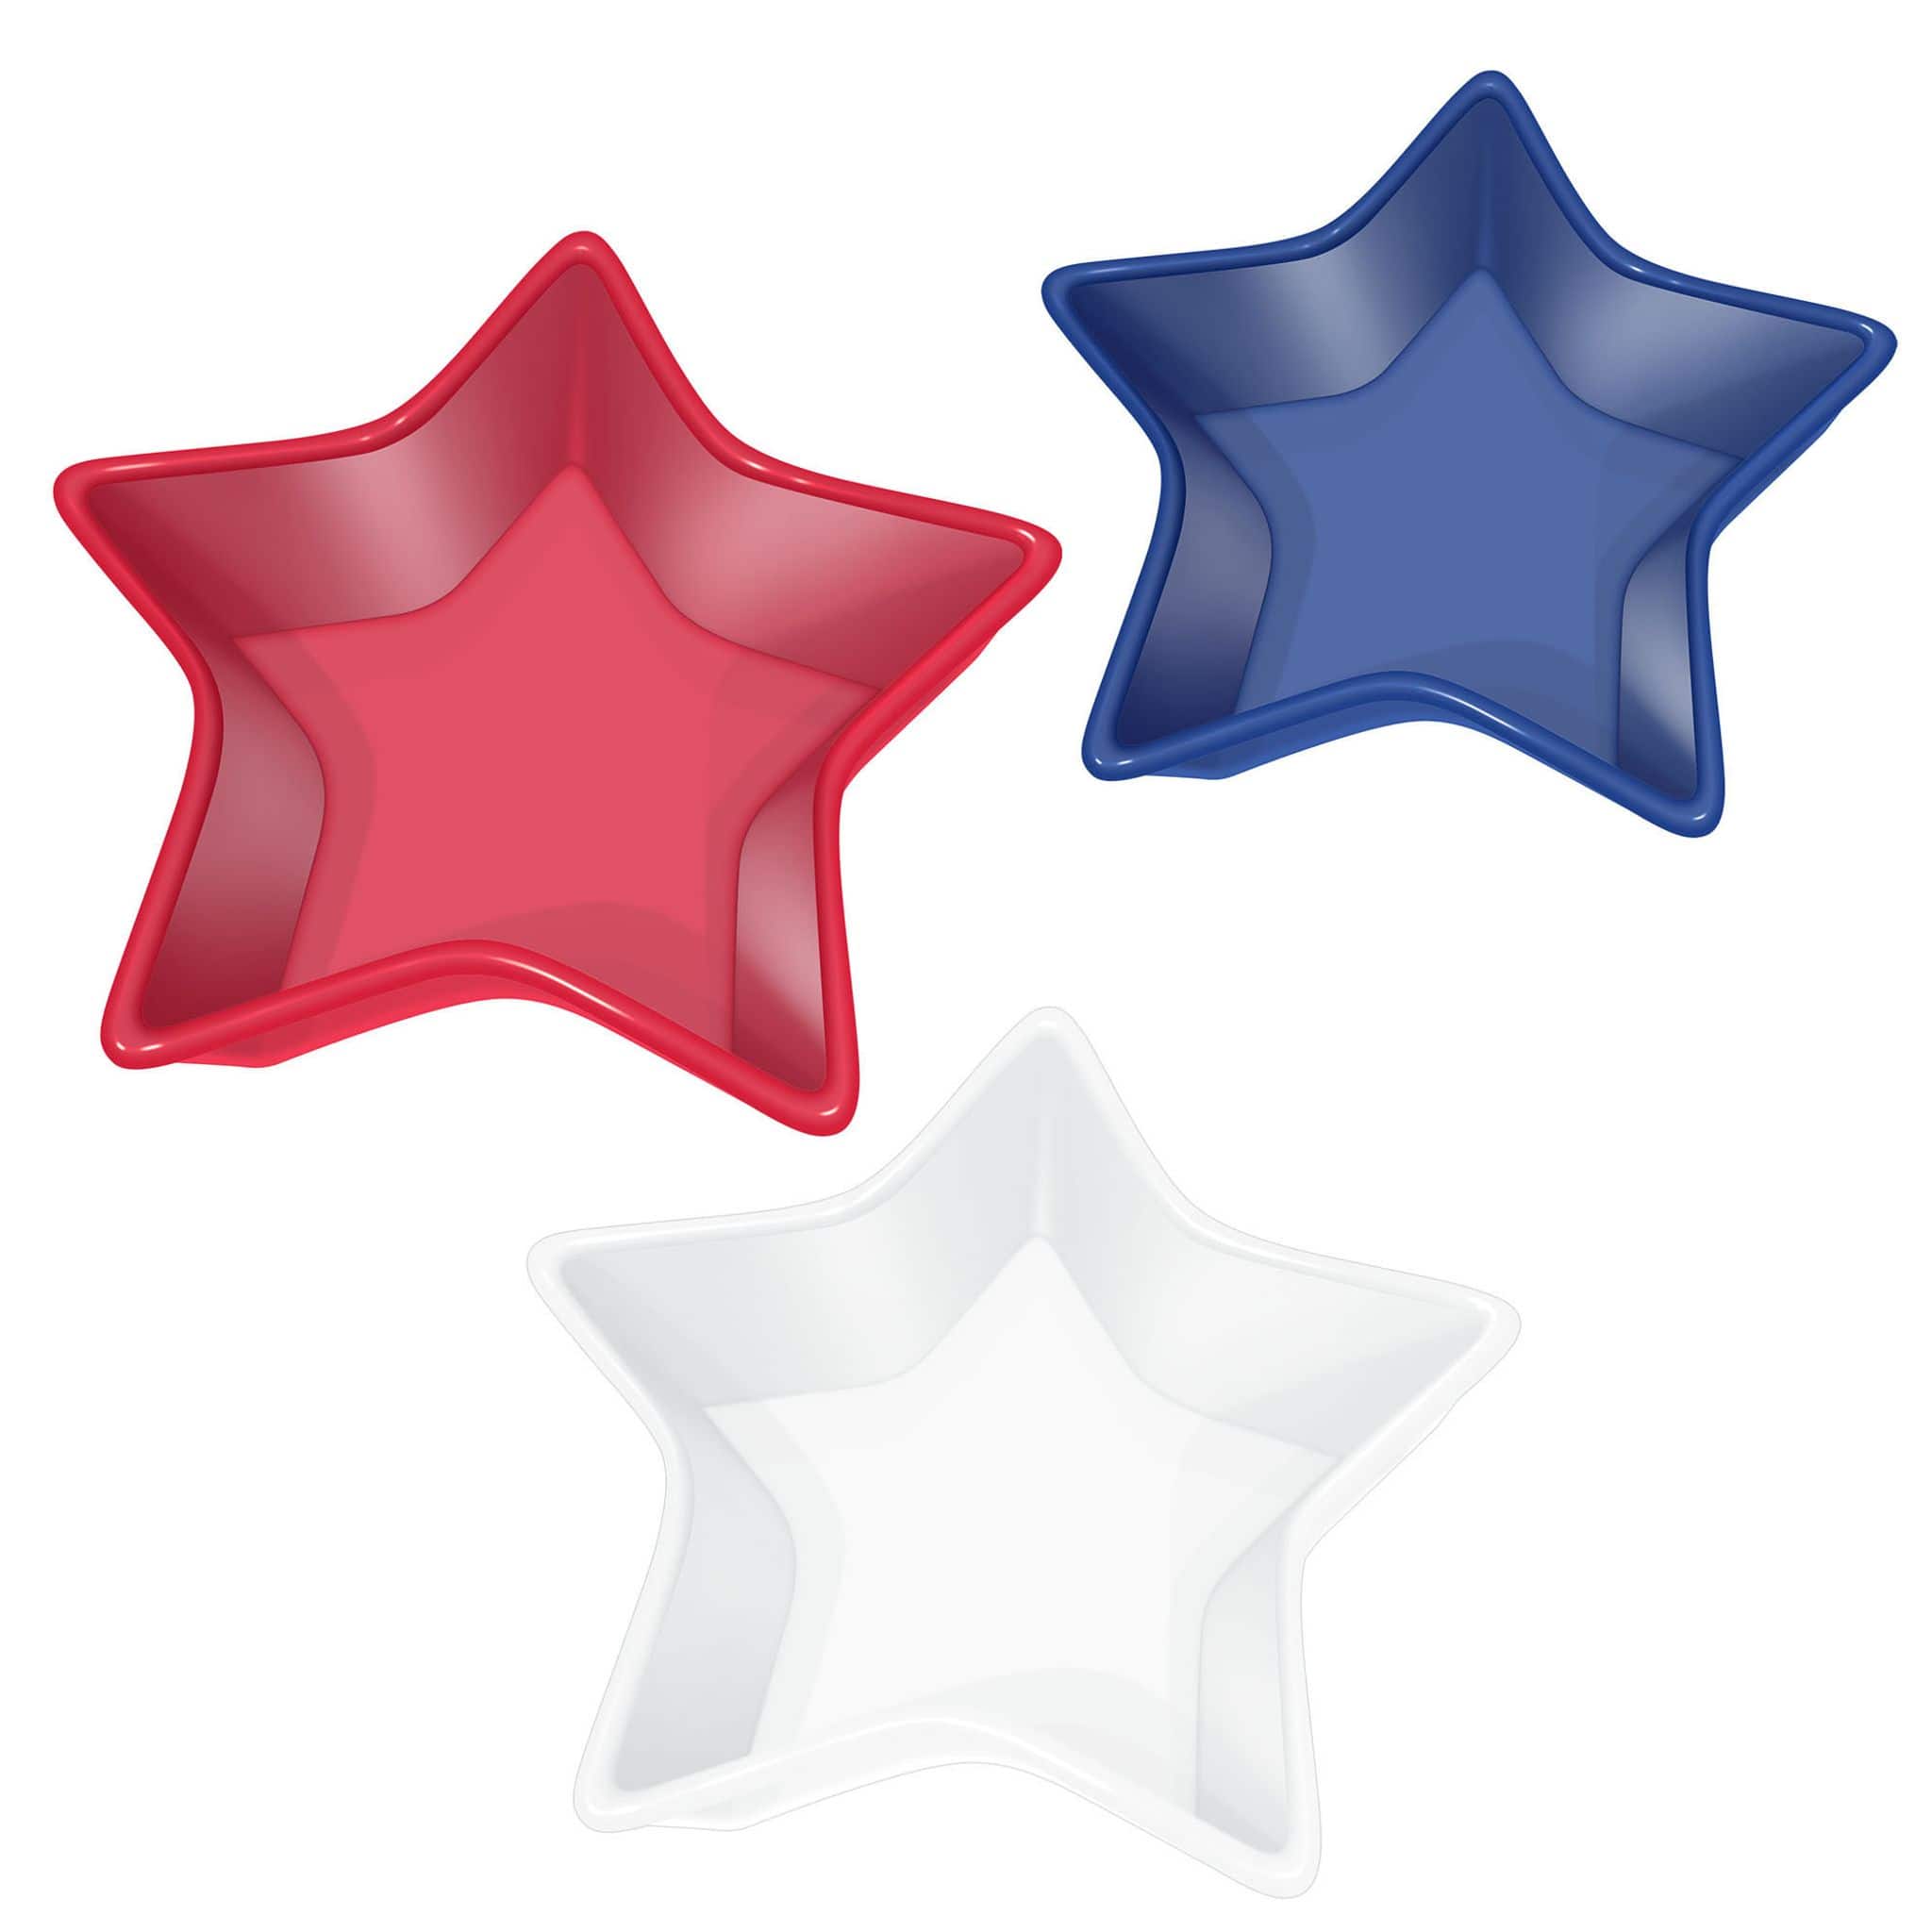 Patriotic Nested Star Shaped Bowls, 6ct.